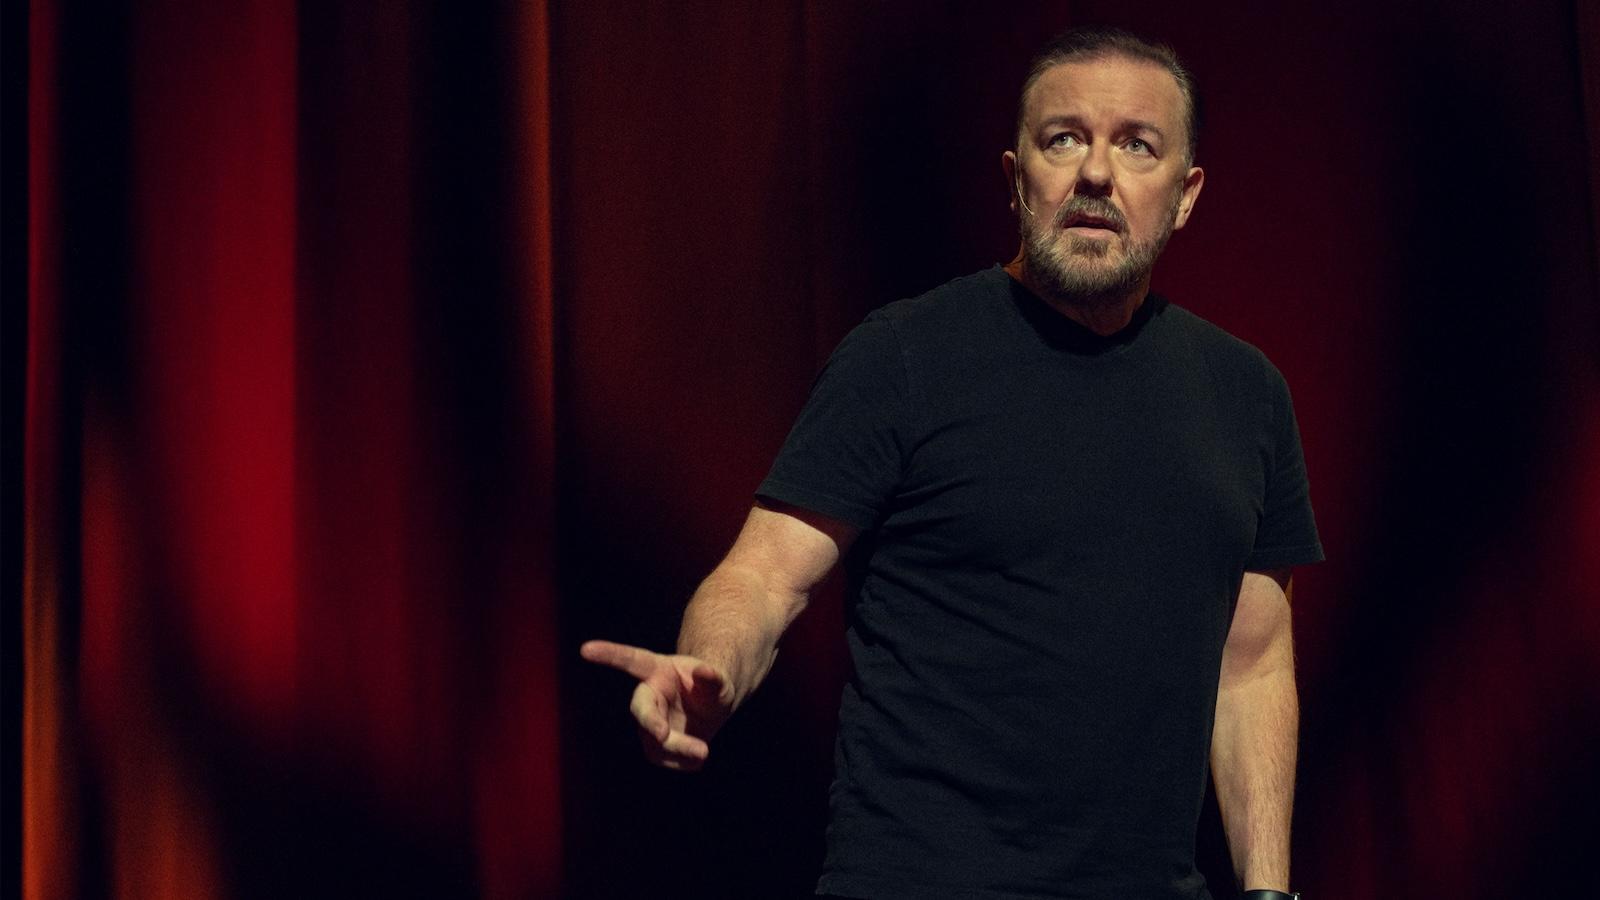 Ricky Gervais in his Netflix stand-up special Armageddon